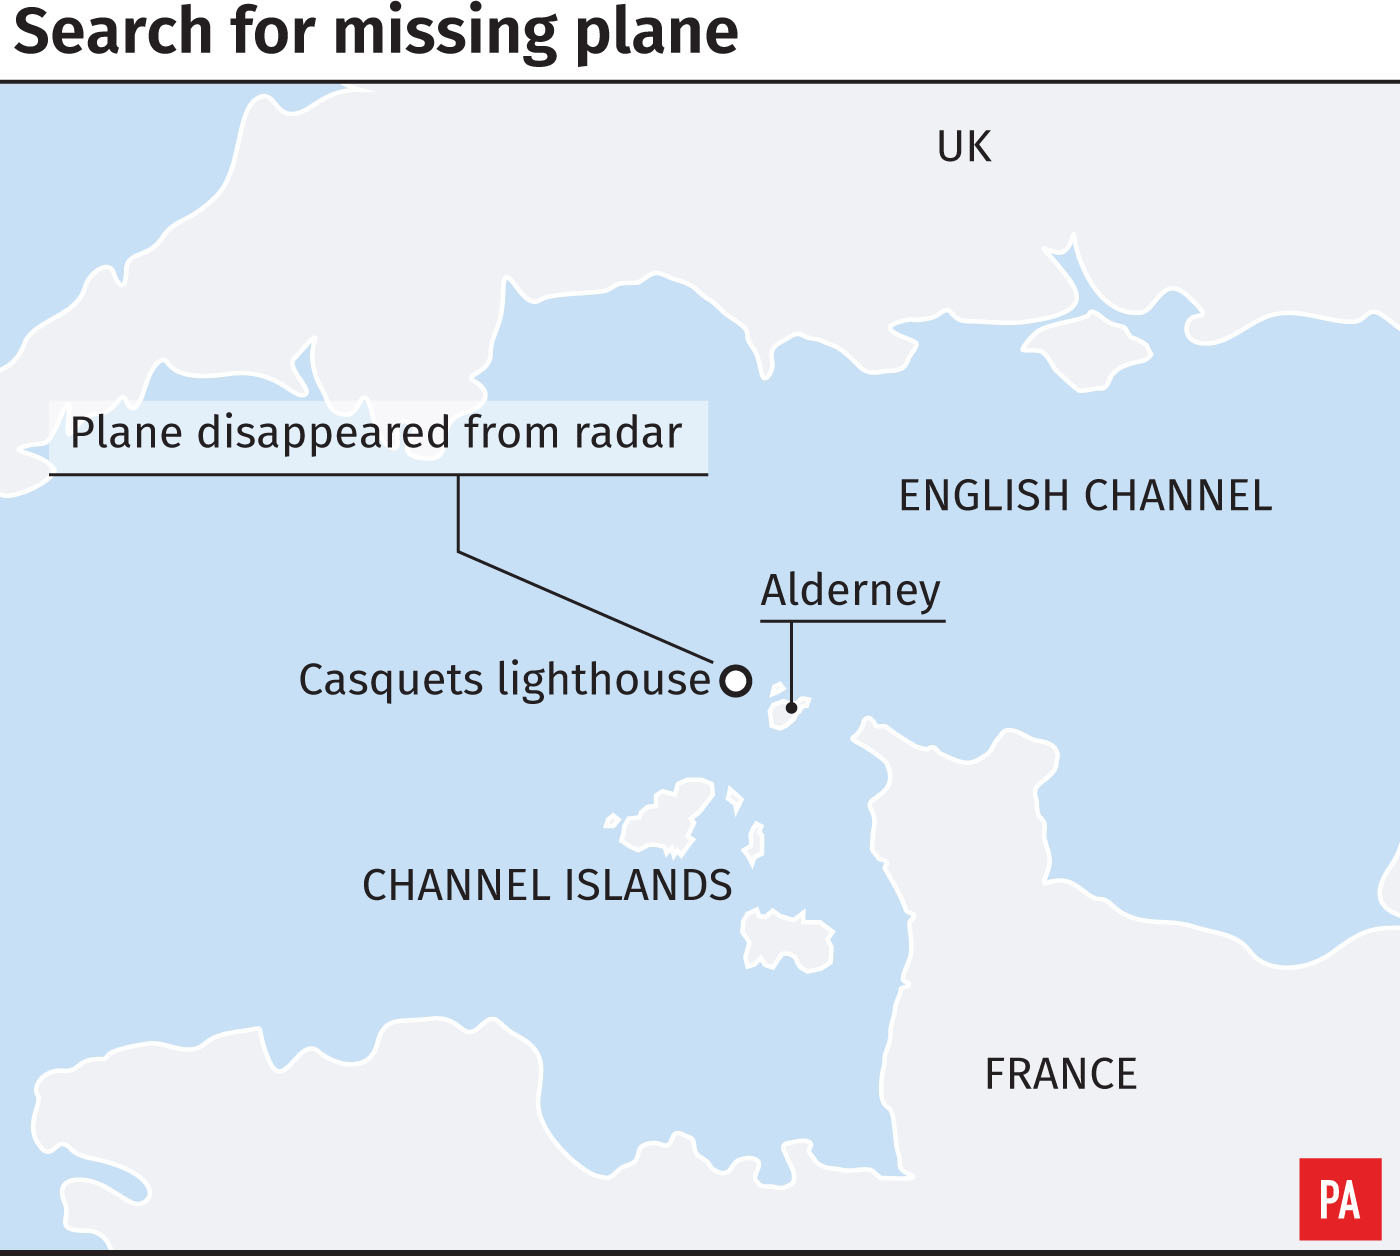 Graphic locates search for a missing aircraft near Alderney in the Channel Islands